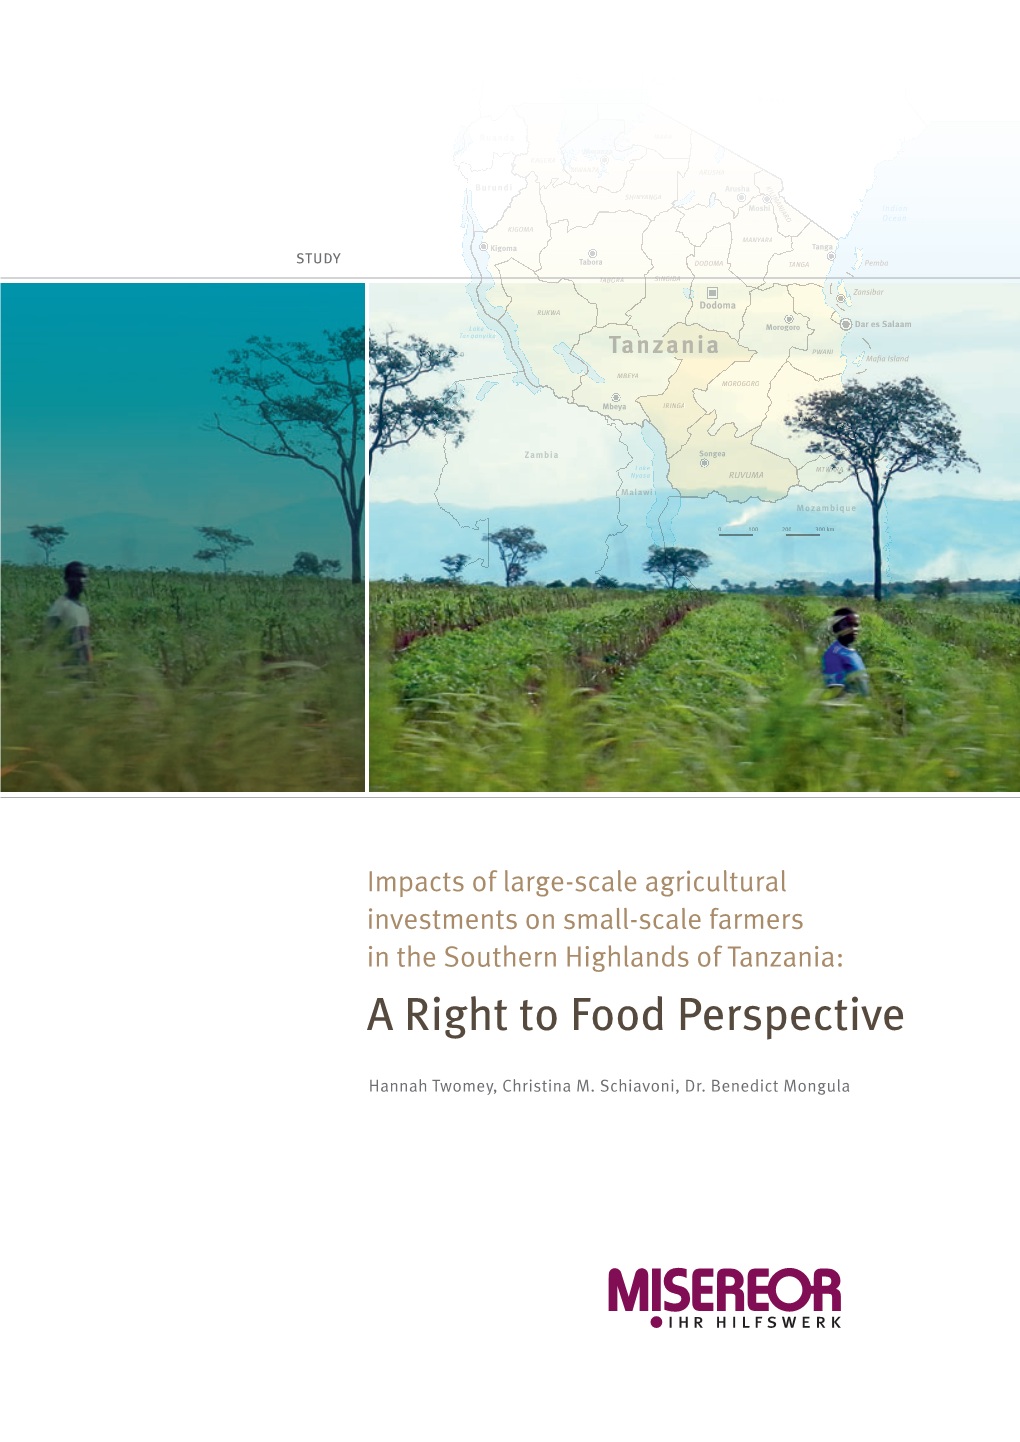 Impacts of Large-Scale Agricultural Investments on Small-Scale Farmers in the Southern Highlands of Tanzania: a Right to Food Perspective